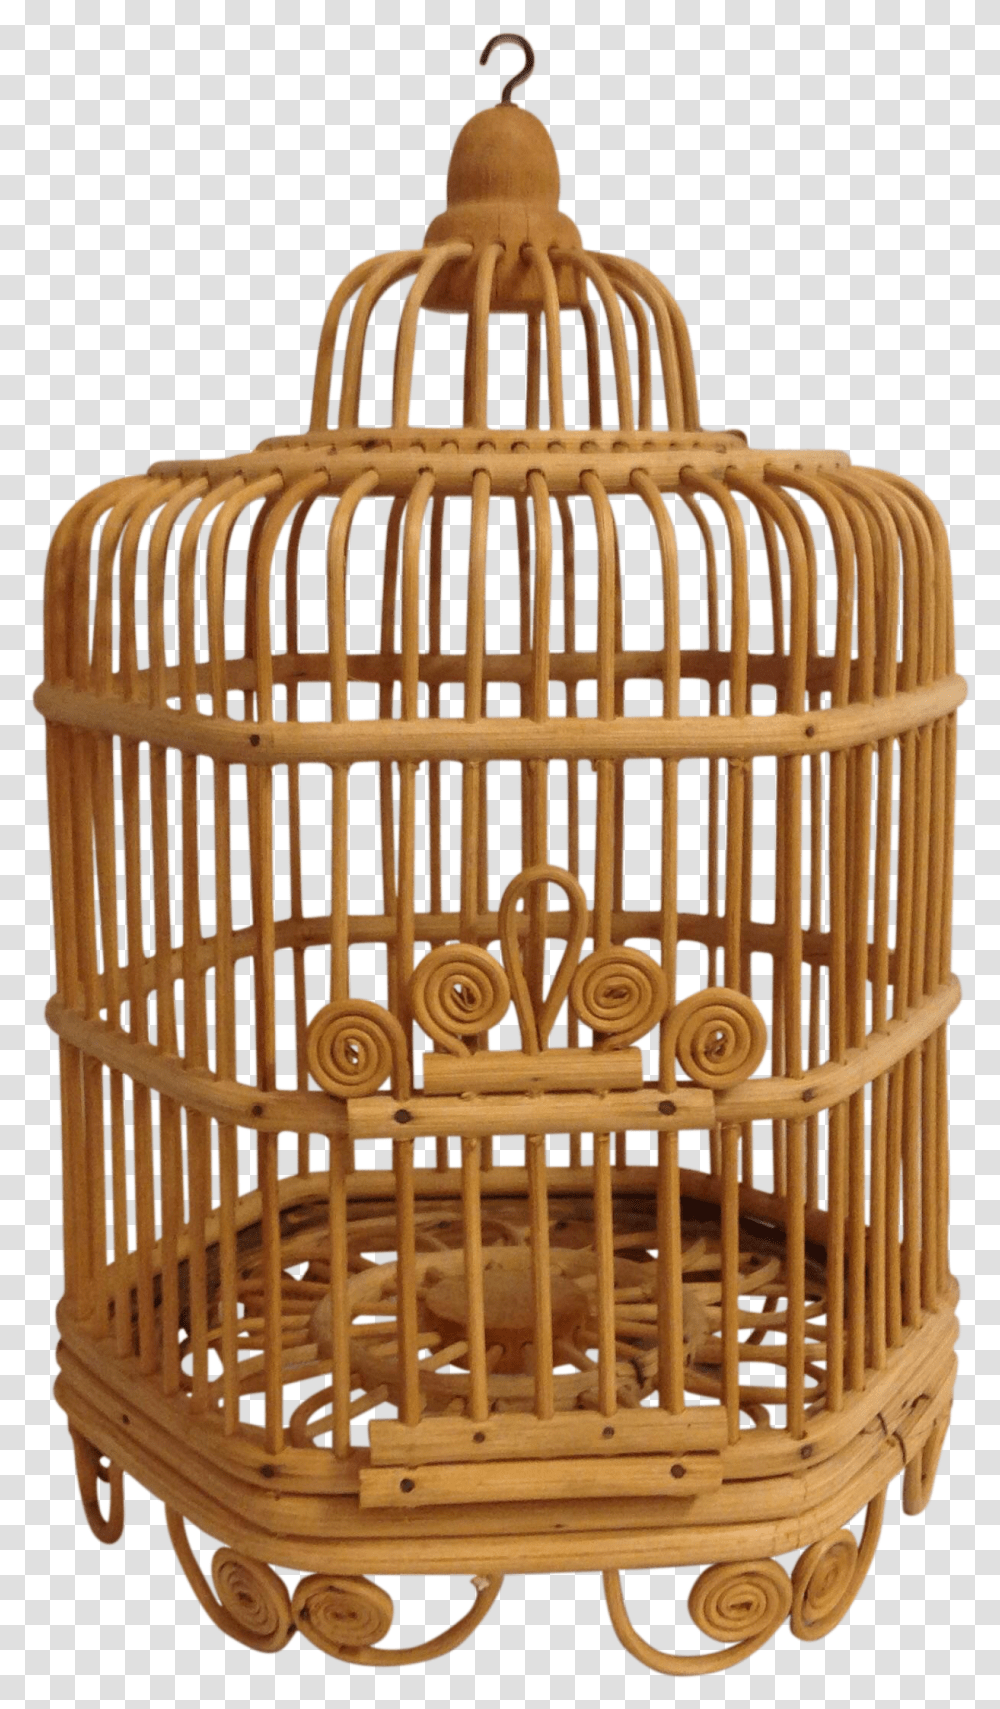 Bird In Cage Picture Bird Cage Bamboo, Crib, Furniture, Wood, Plywood Transparent Png